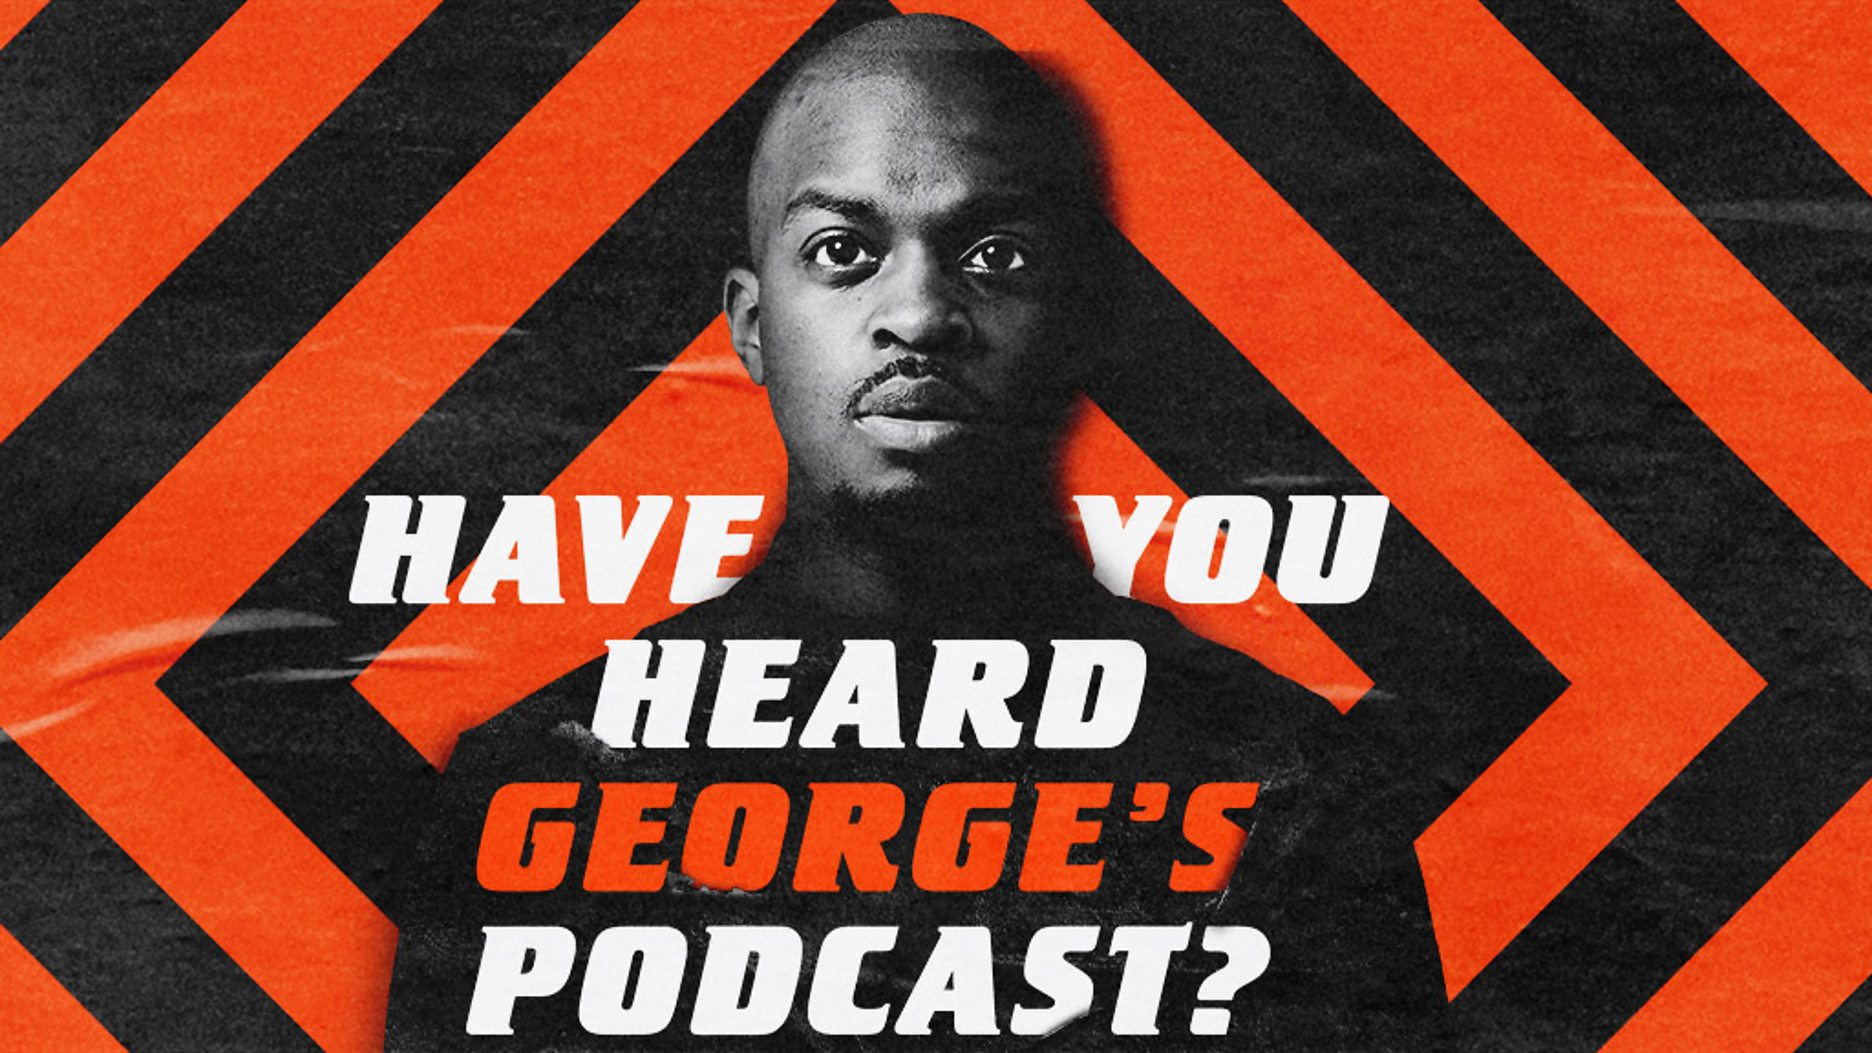 Have You Heard George’s Podcast? returns to BBC Sounds